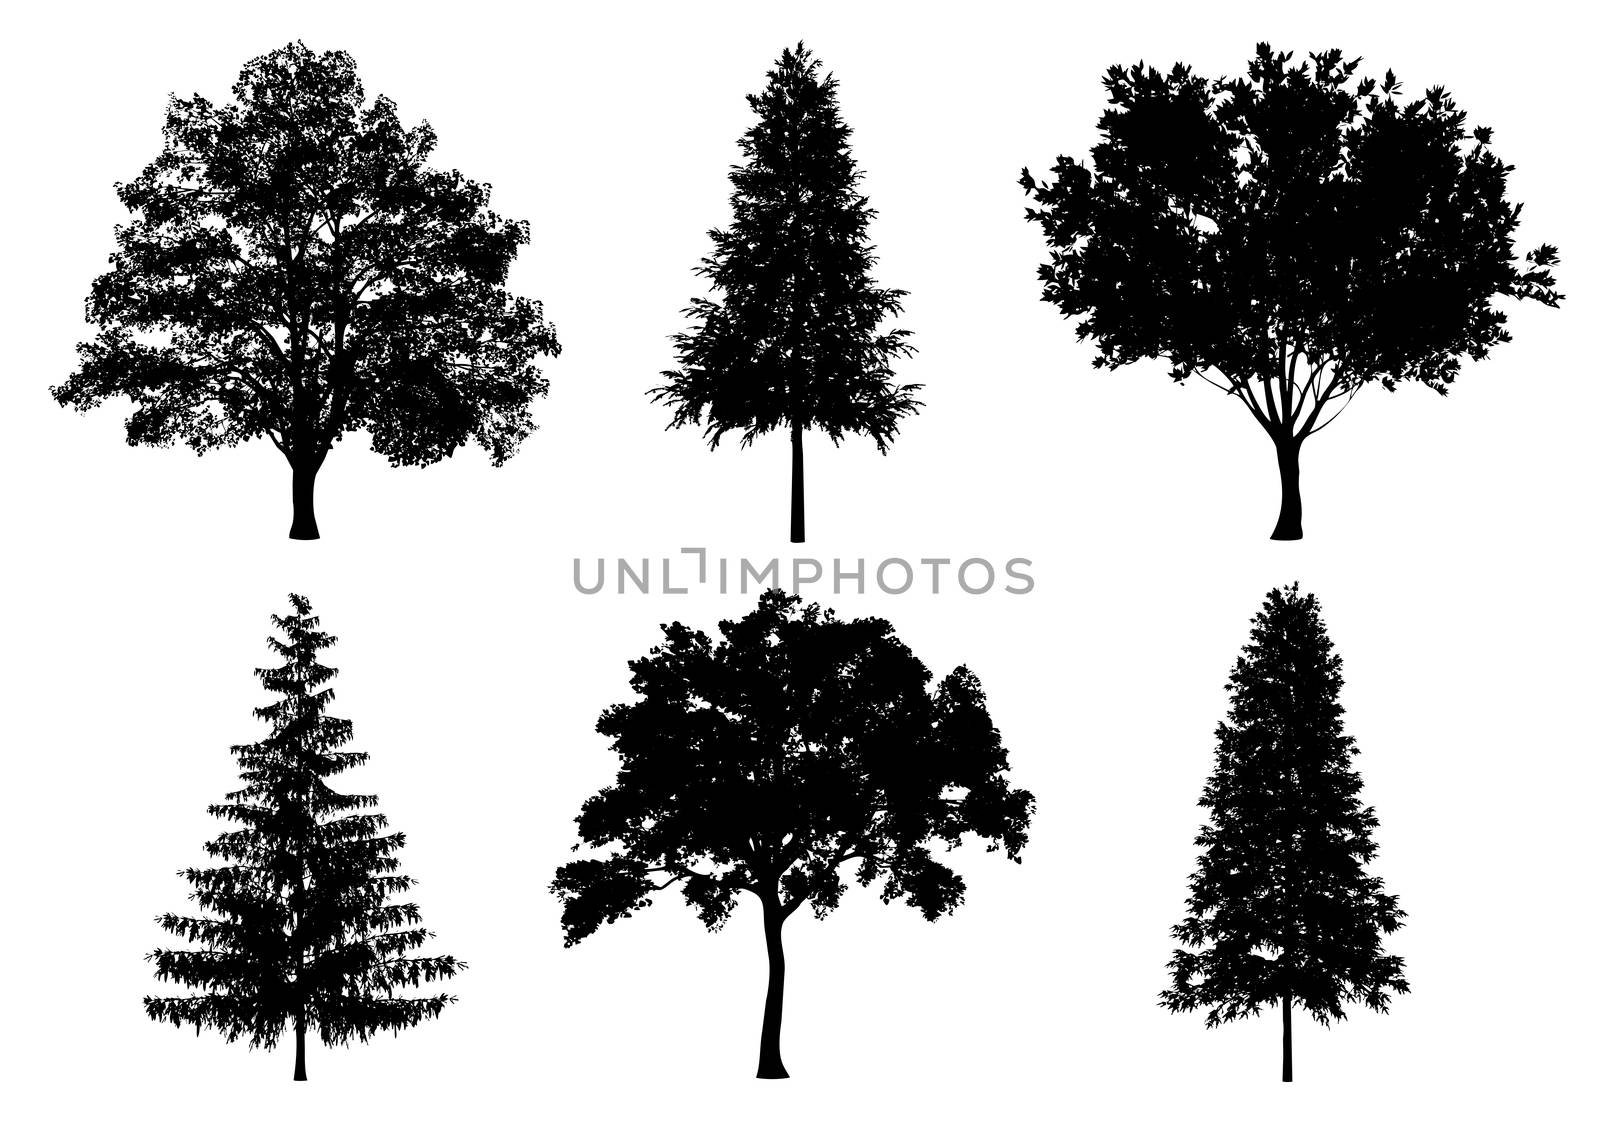 Beautiful collection tree silhouettes and cutting on a white background with clipping path.